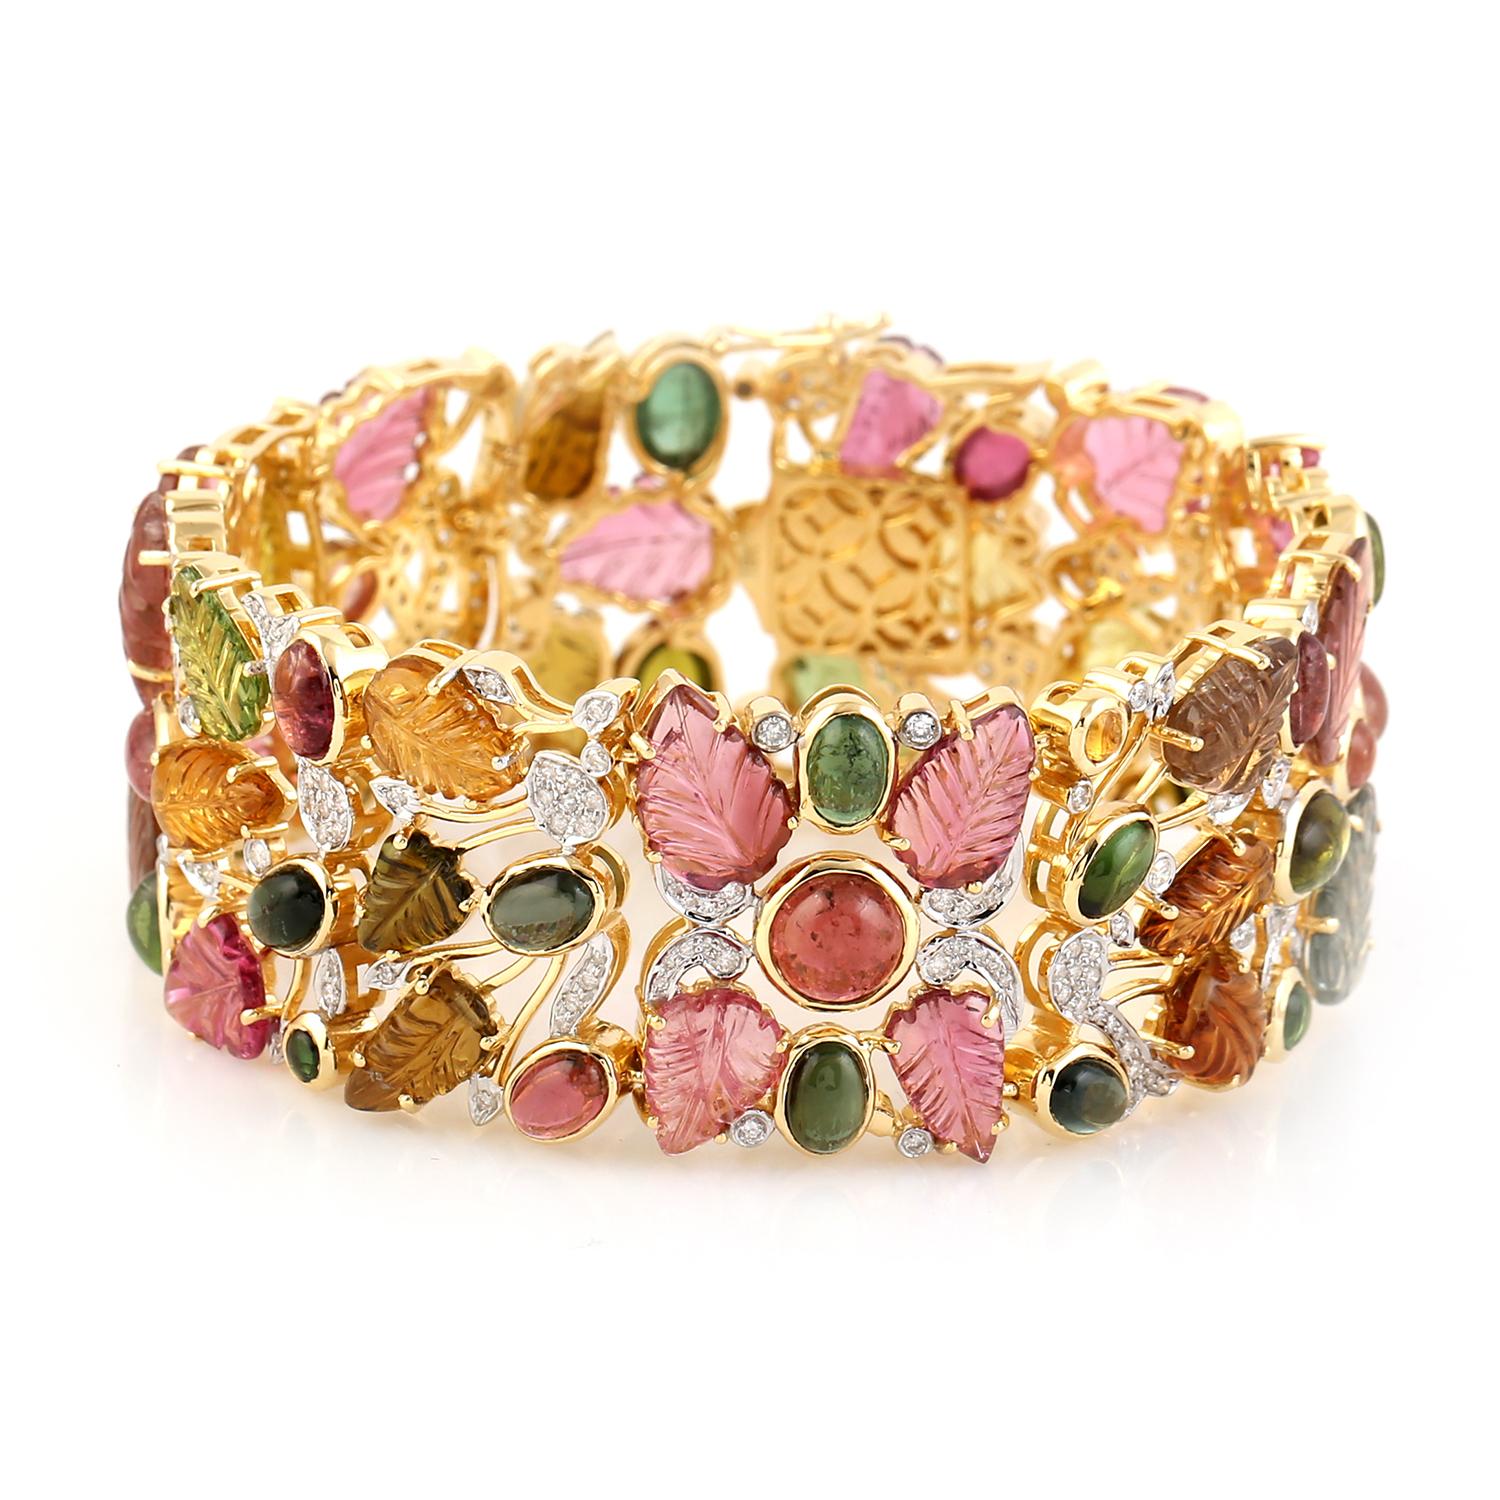 Mixed Cut Multi Color Tourmaline Bracelet With Diamonds Made In 18k Yellow Gold For Sale